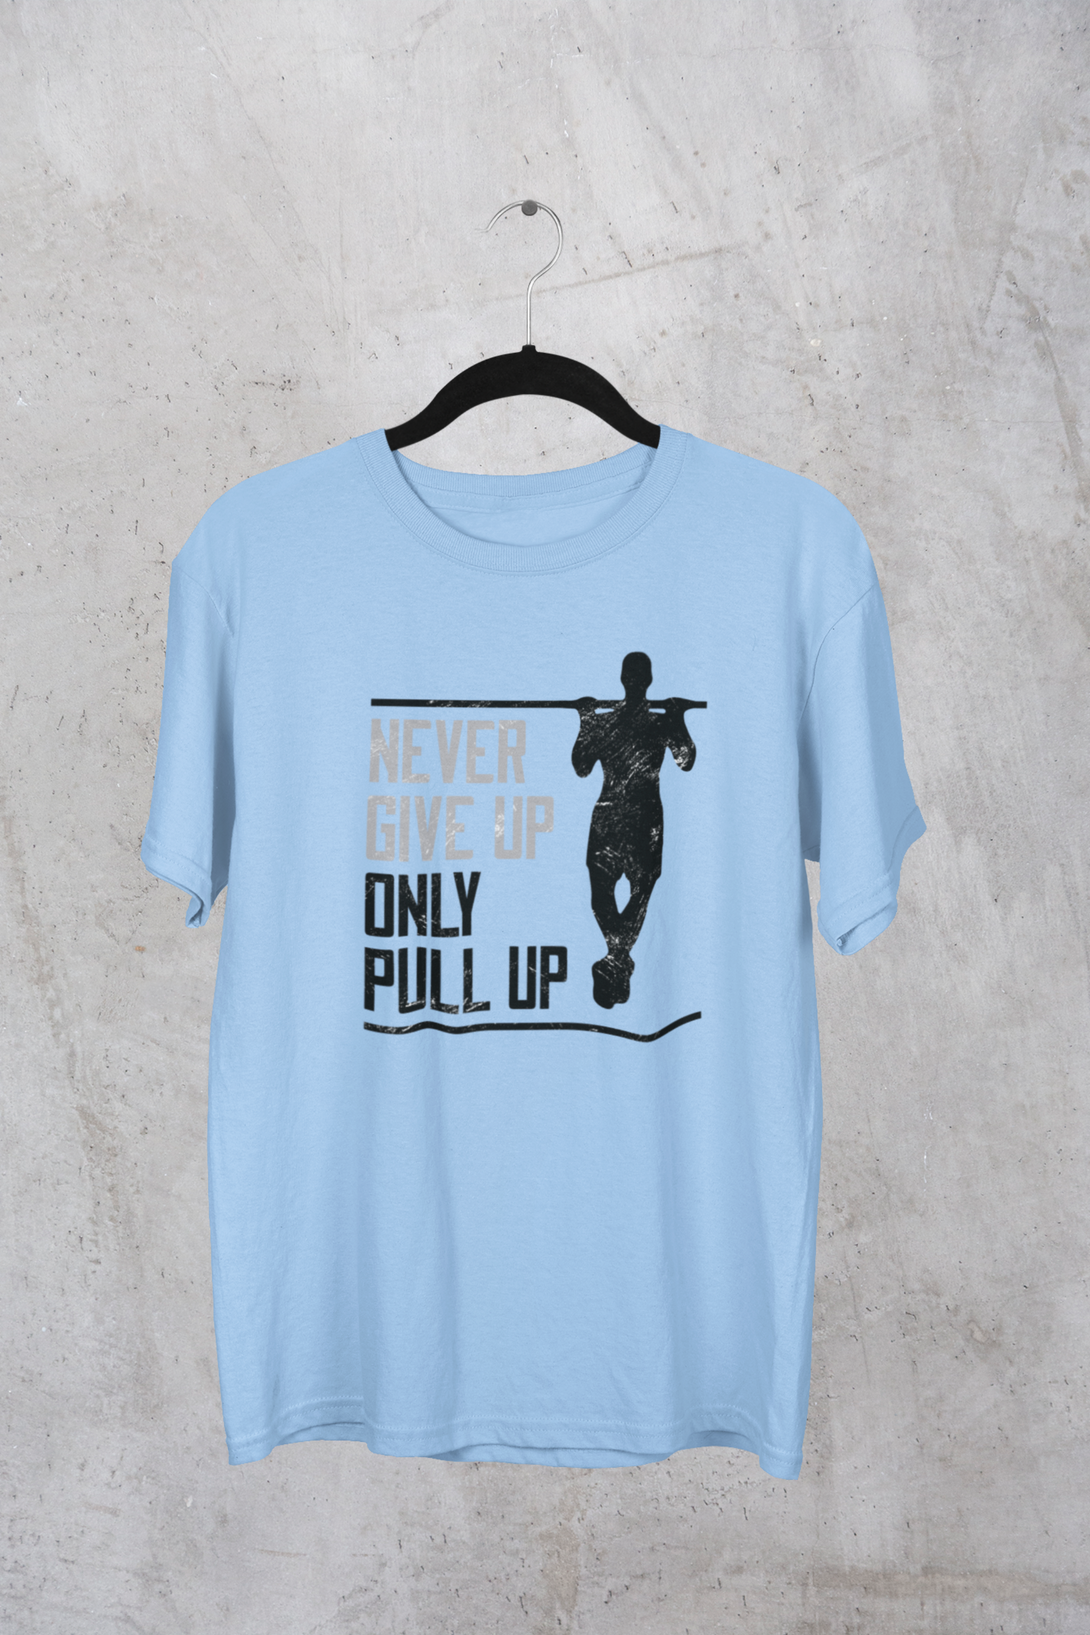 Never Give Up Only Pull Up Printed Oversized T-Shirt For Men - WowWaves - 4